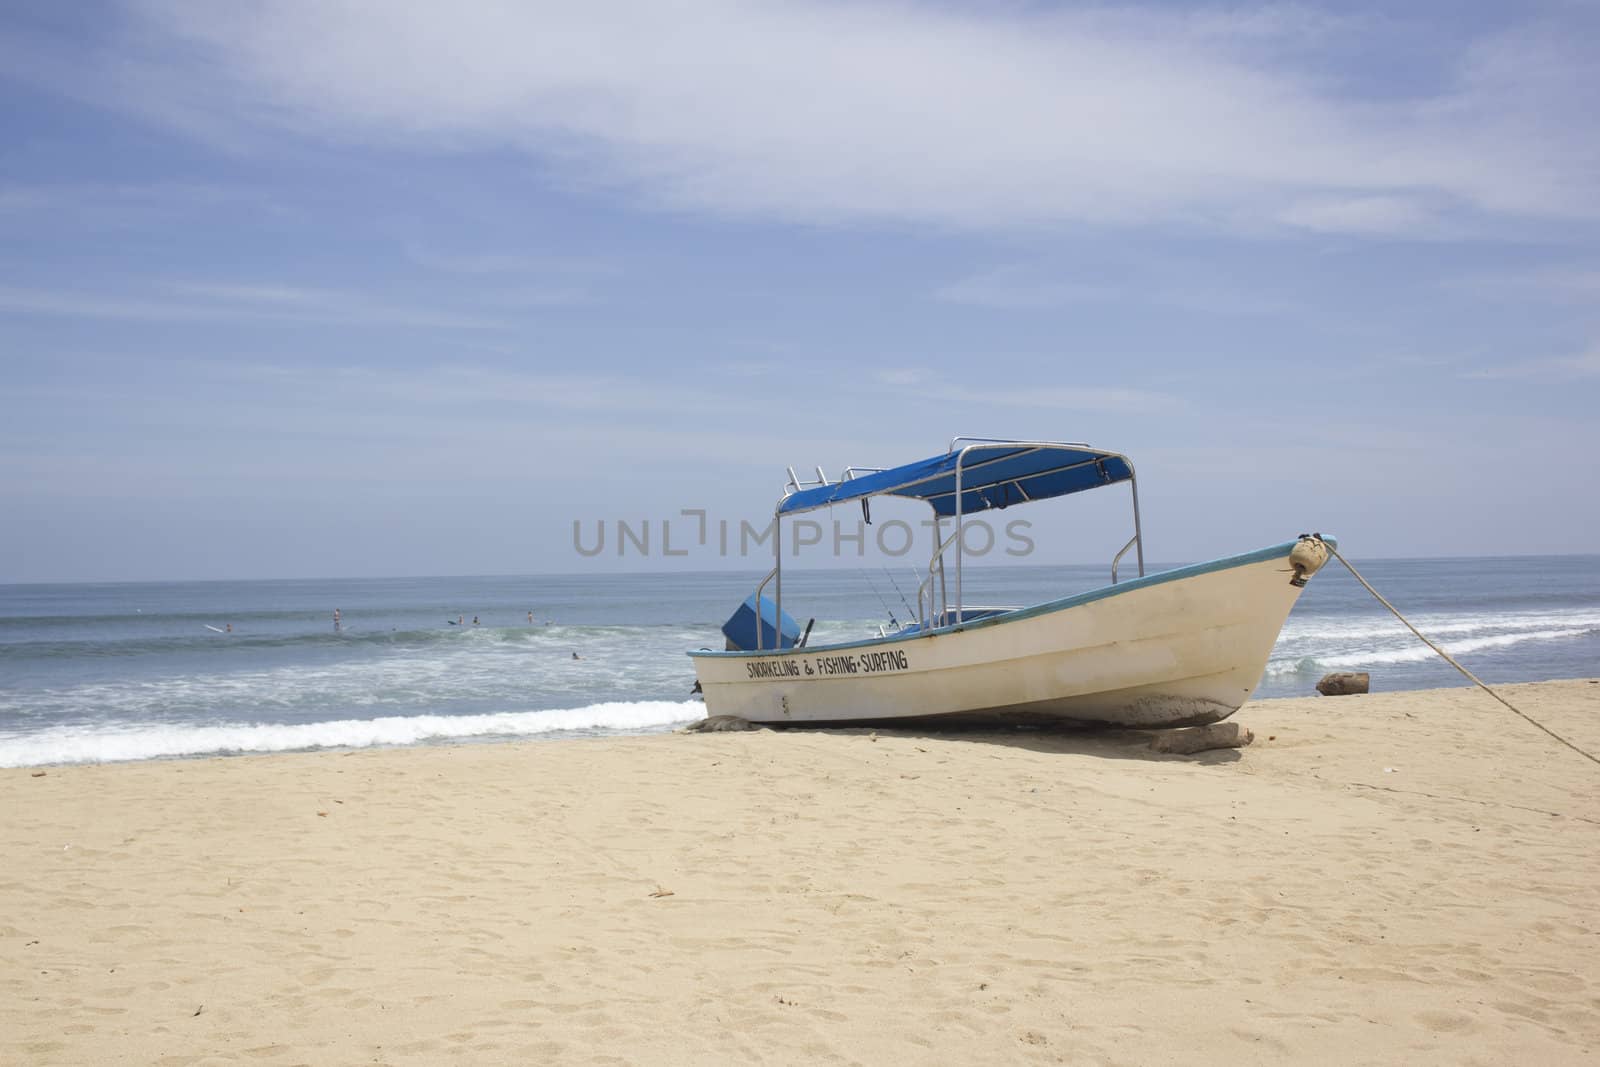 Boat on the beach by jeremywhat